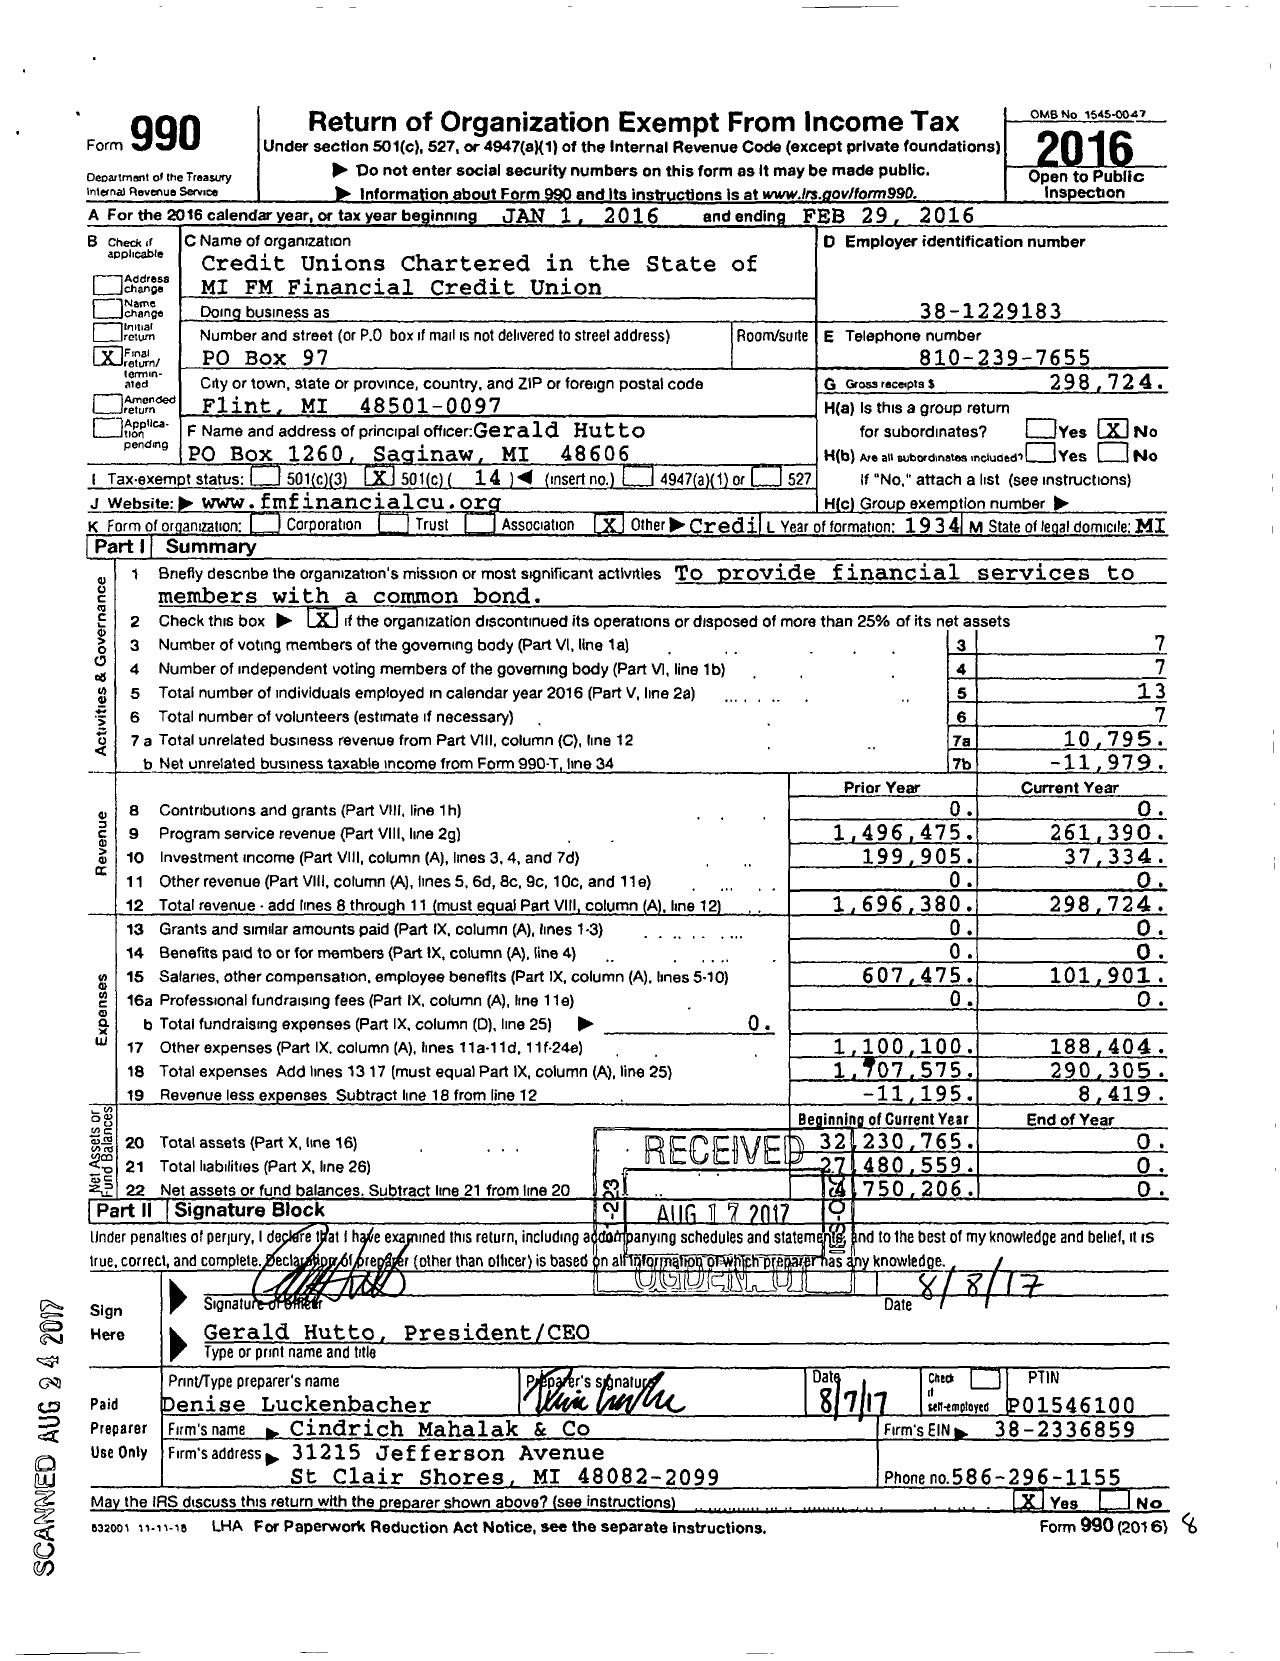 Image of first page of 2015 Form 990O for Credit Unions Chartered in the State of Michigan - 65 FM Financial Credit Union